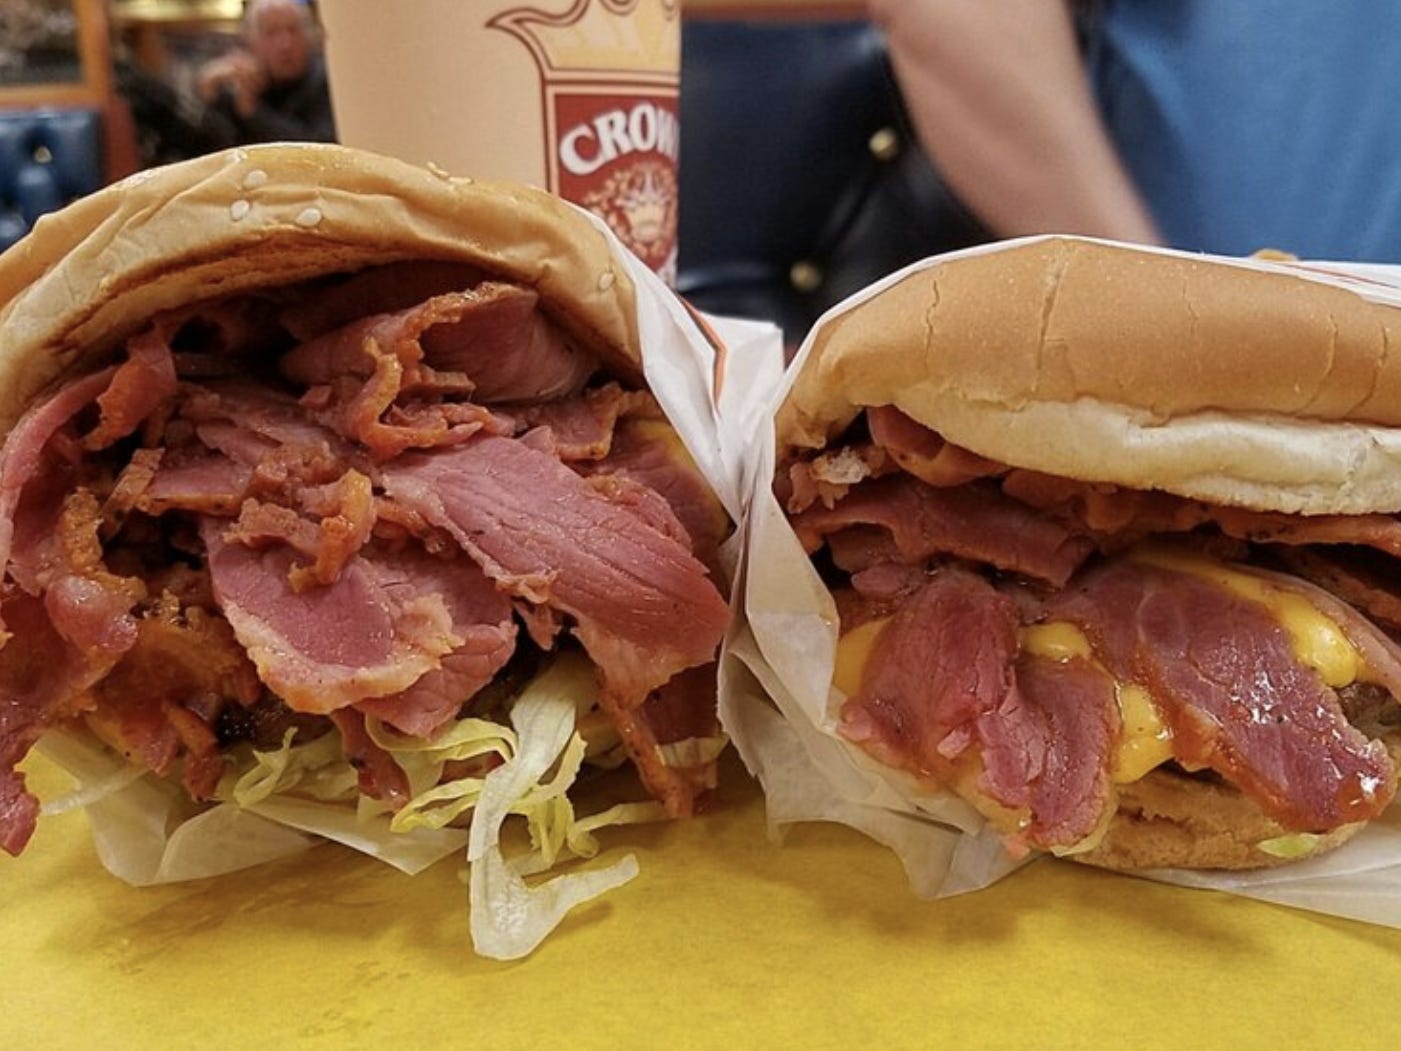 <p>When in Utah, it's perfectly acceptable to dig in to a burger topped with a quarter-pound of thin-sliced pastrami. "Pastrami burgers," which originated at <a href="https://www.yelp.com/biz/crown-burgers-salt-lake-city-6">Crown Burgers in Salt Lake City</a>, are slathered with a thousand island-style sauce as well as tomatoes, shaved lettuce, and onions.</p>